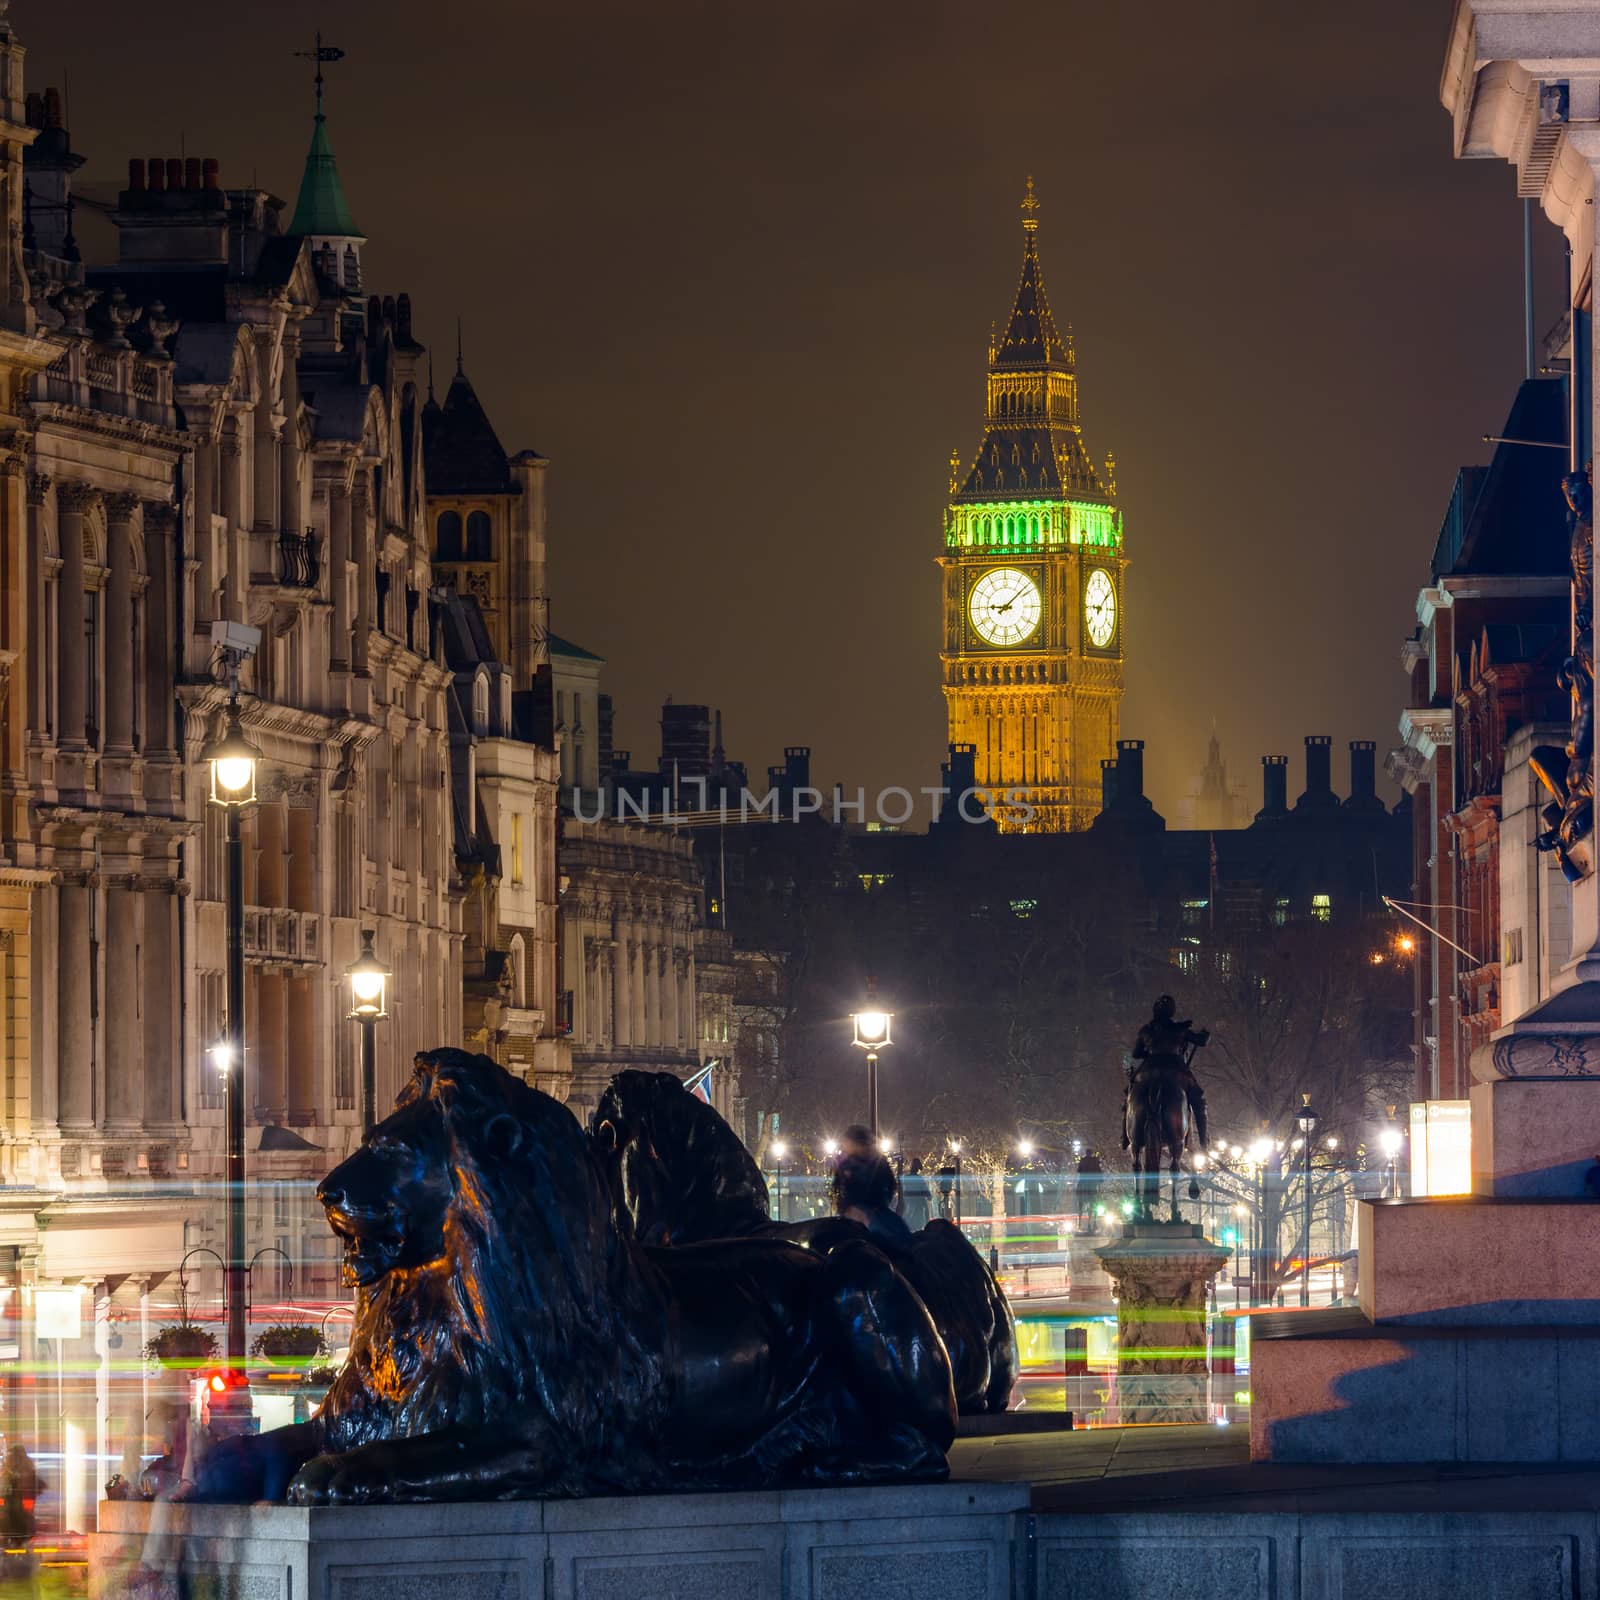 The Clock Tower seen from Trafalgar Square at night by dutourdumonde